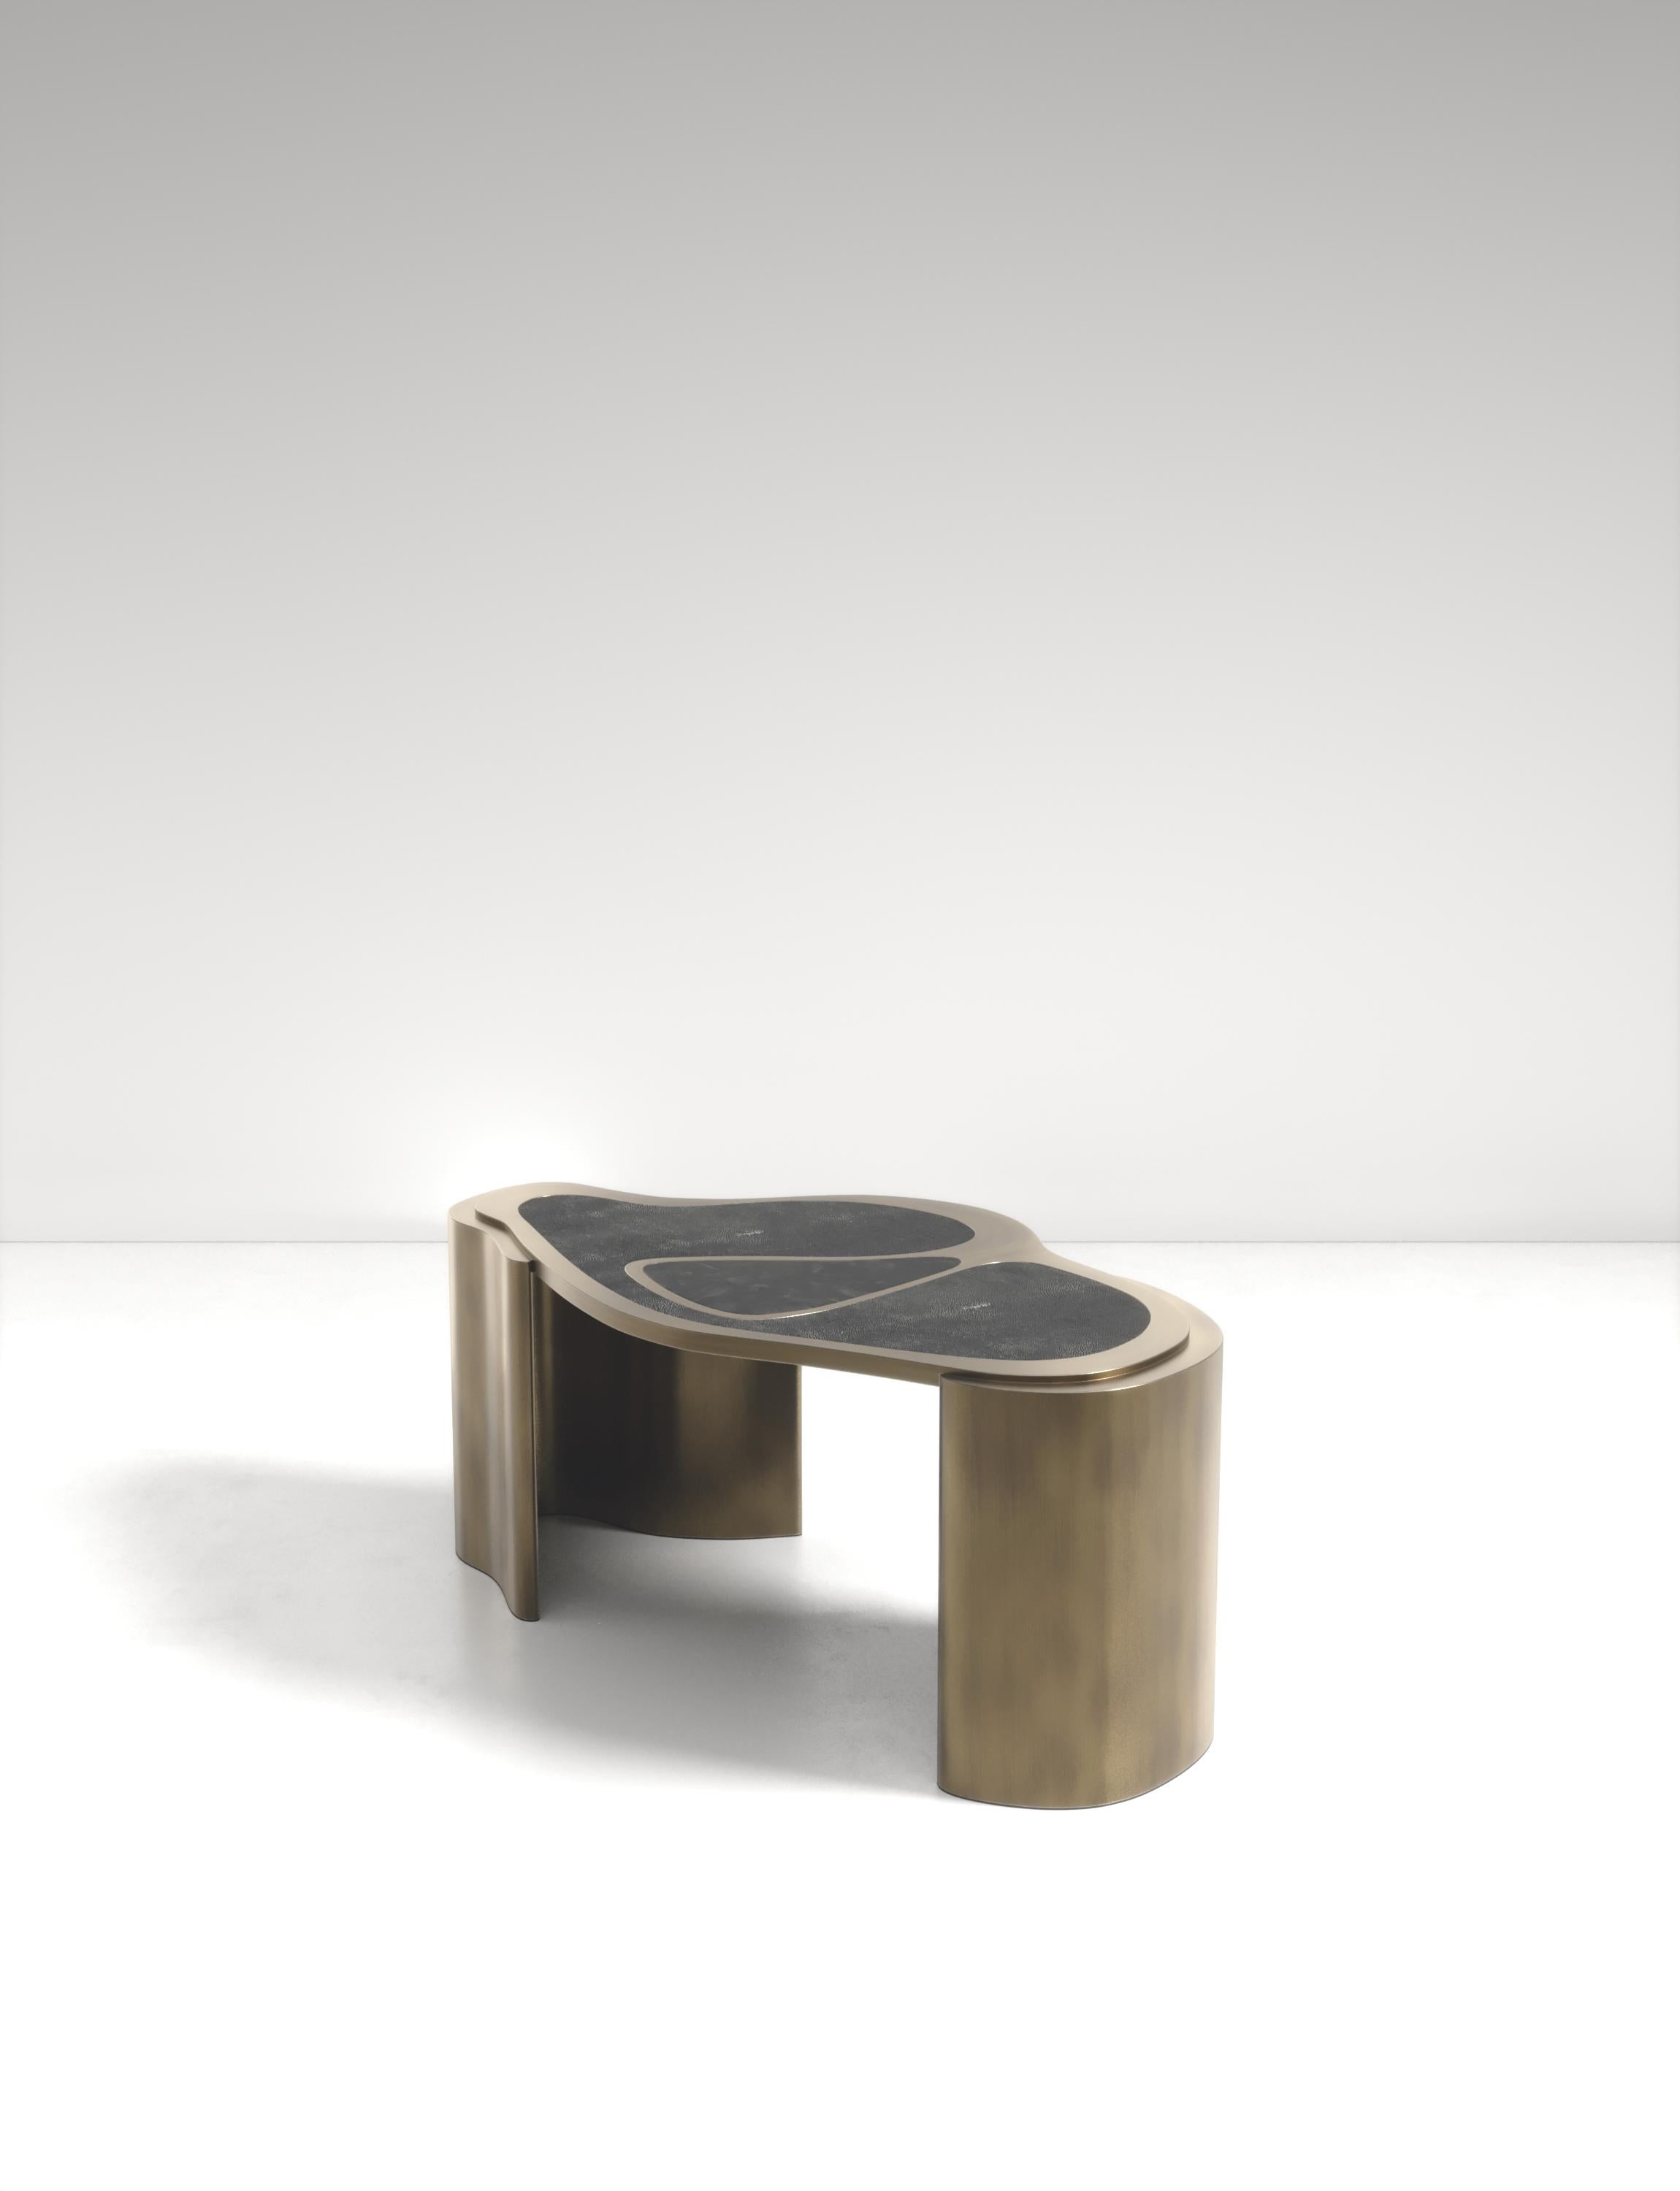 The Mask Coffee Table by Kifu Paris is a versatile and organic piece. The amorphous top and base are inlaid in a mixture of coal black shagreen, black pen shell and bronze-patina brass. This piece is designed by Kifu Augousti the daughter of Ria and